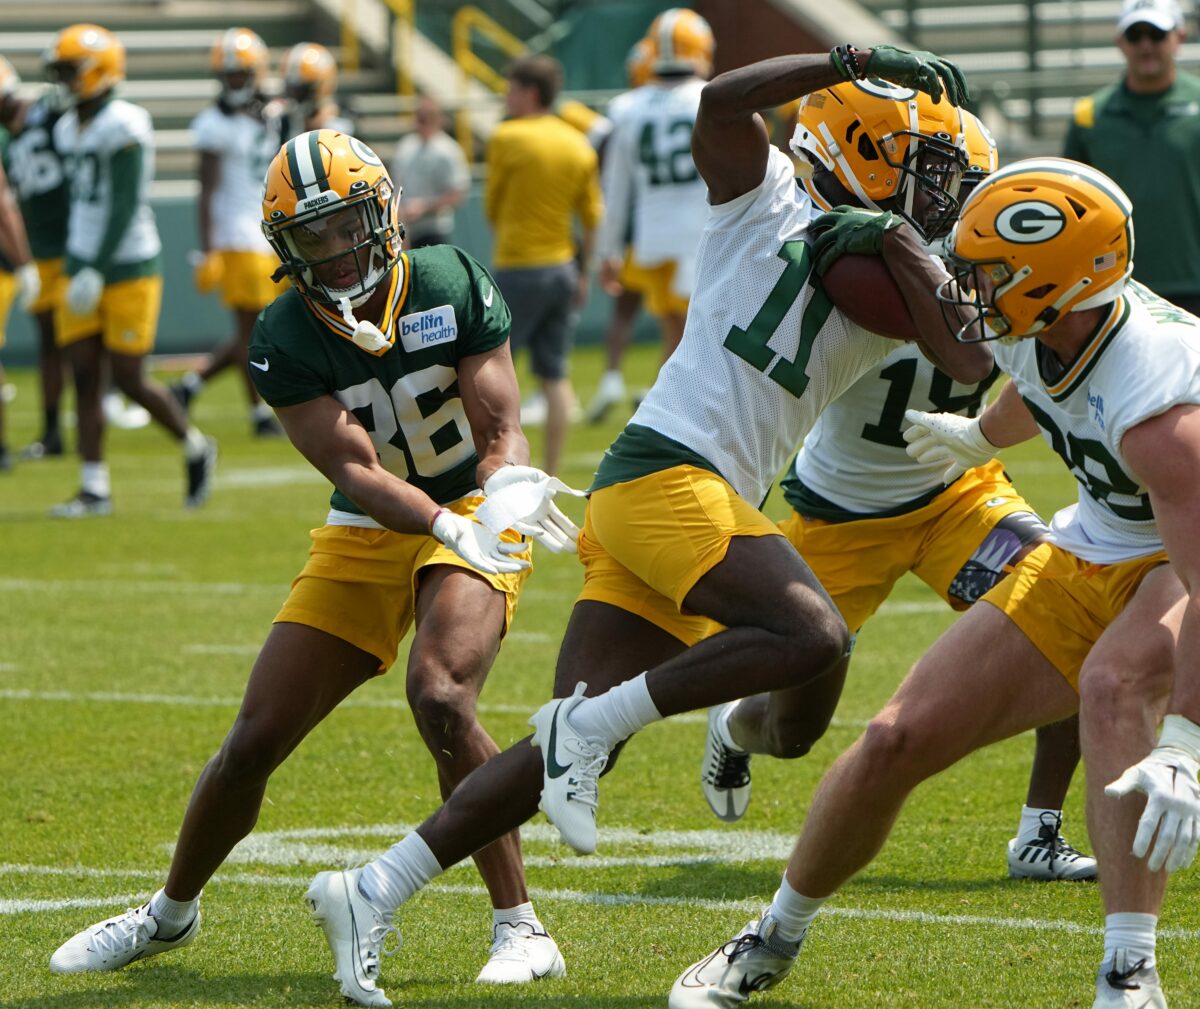 Bulk of early practice reps for Packers WR Jayden Reed coming from slot